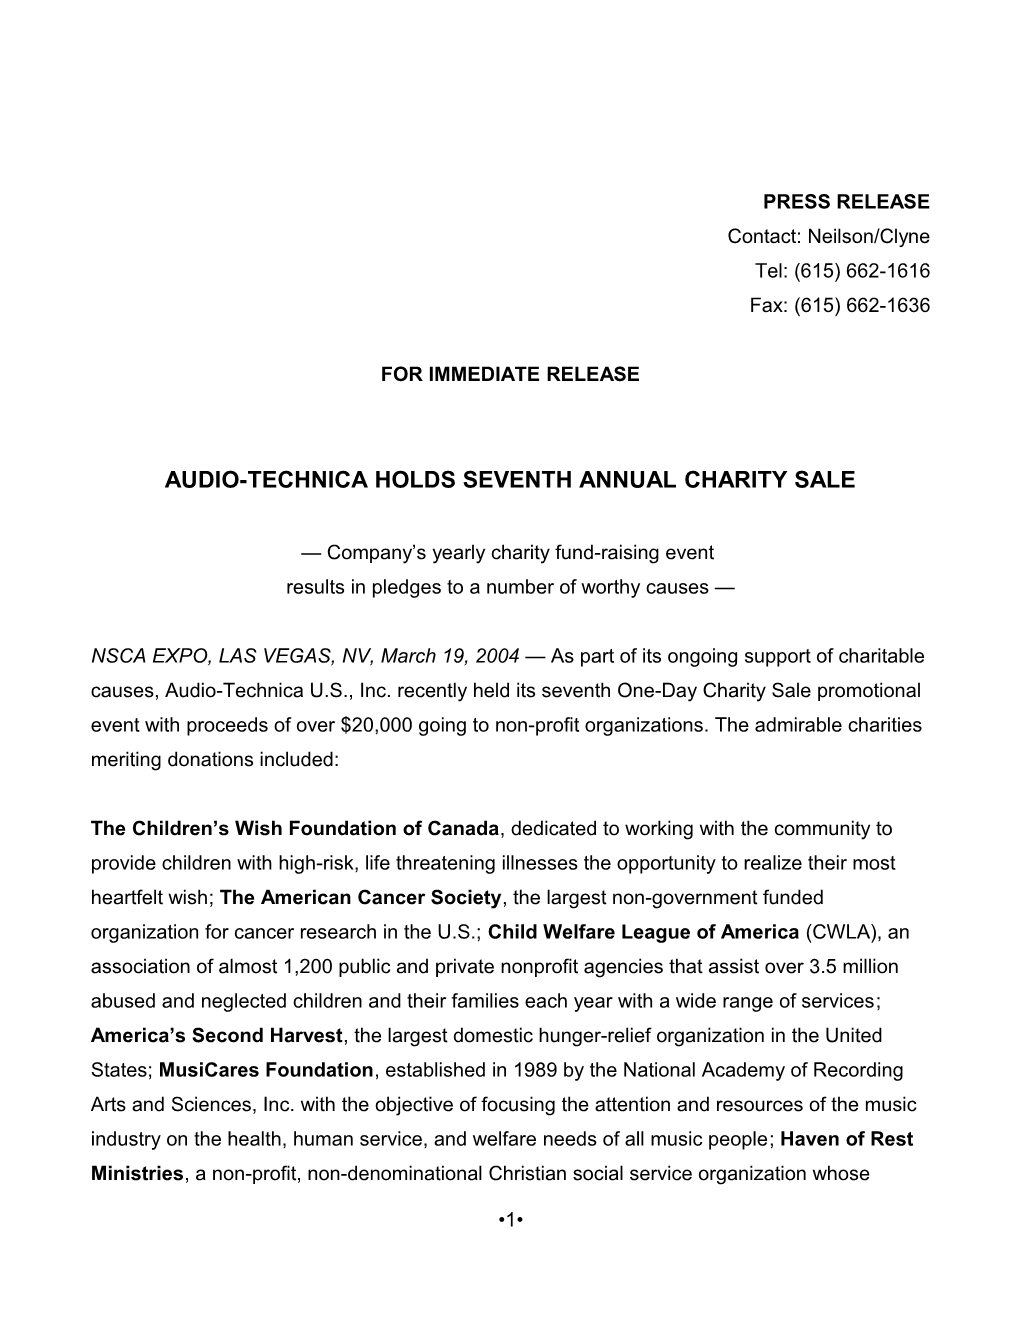 Audio-Technica Holds Seventh Annual Charity Sale